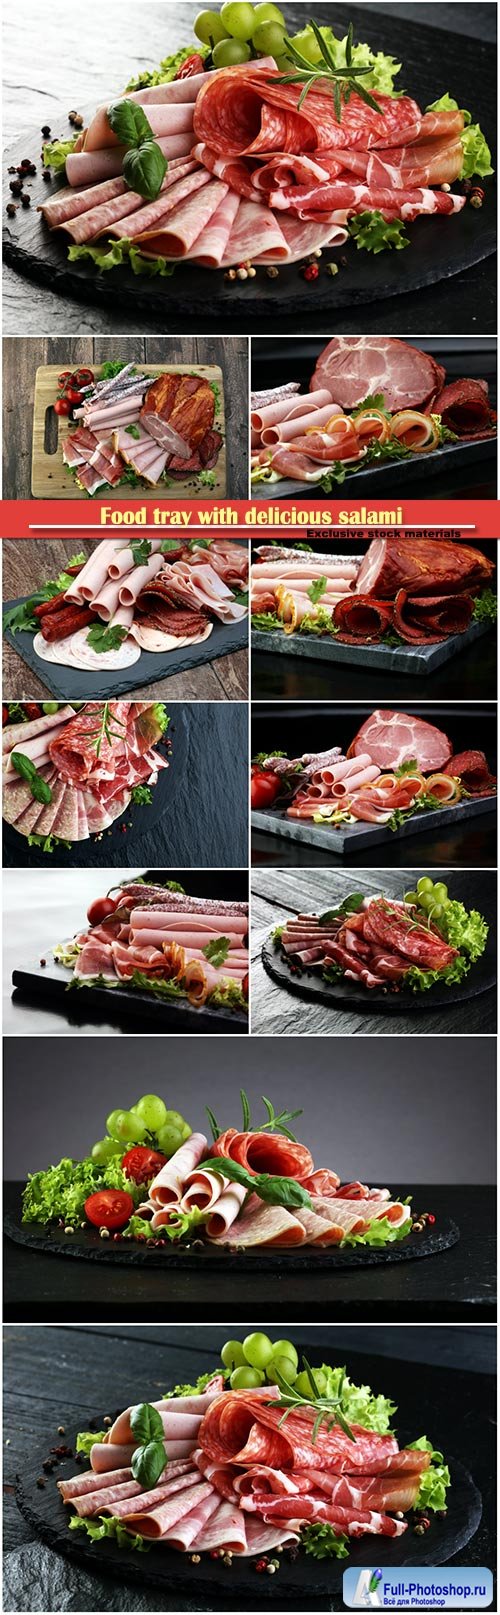 Food tray with delicious salami, pieces of sliced ham, sausage, tomatoes, salad and vegetable